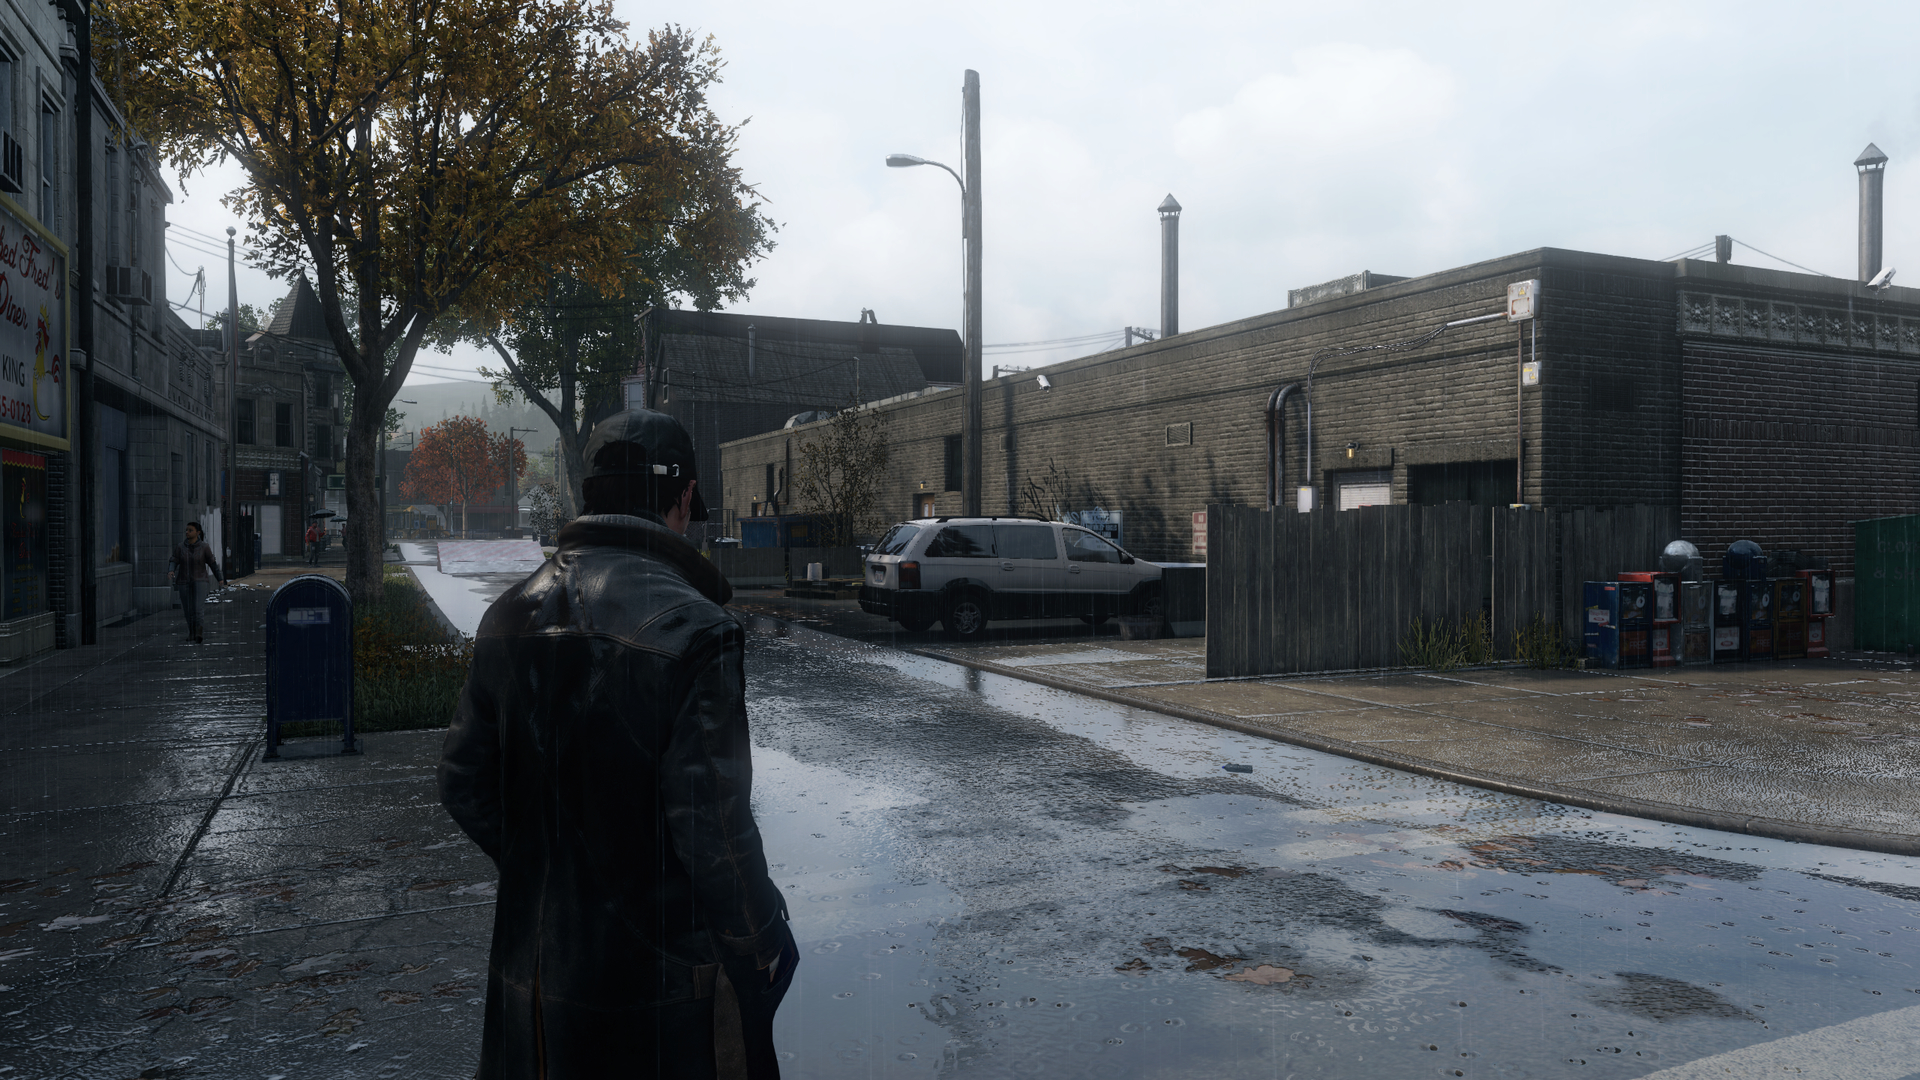 watch_dogs_exe_dx11_20140530_191912_1080p_by_confidence_man-d7keooy.jpg